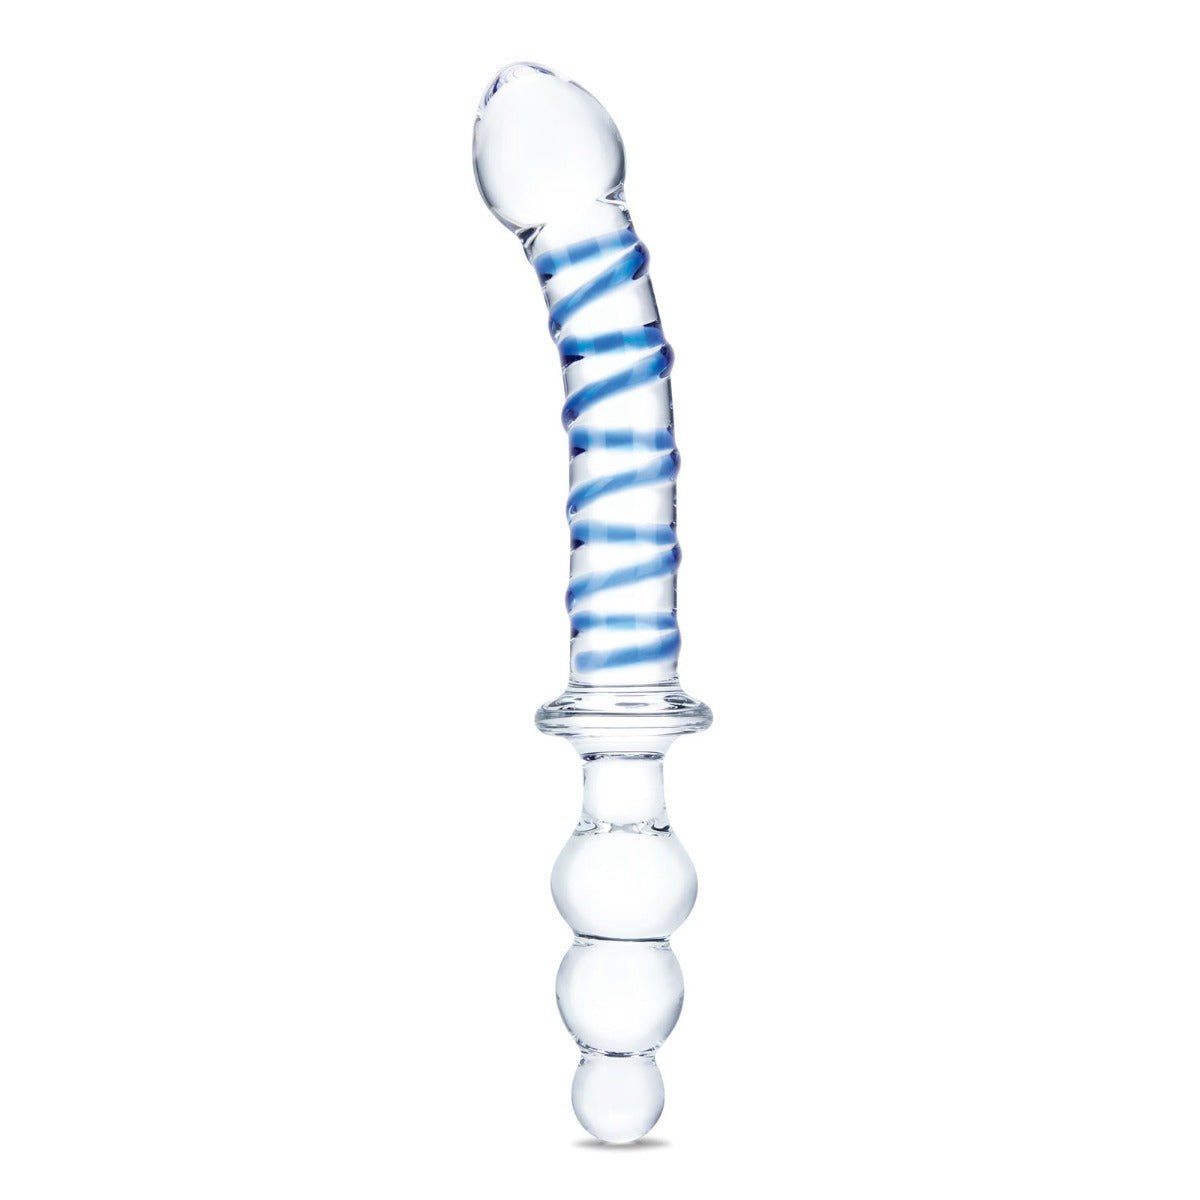 Glas | 10 Inch Twister Dual Ended Dildo